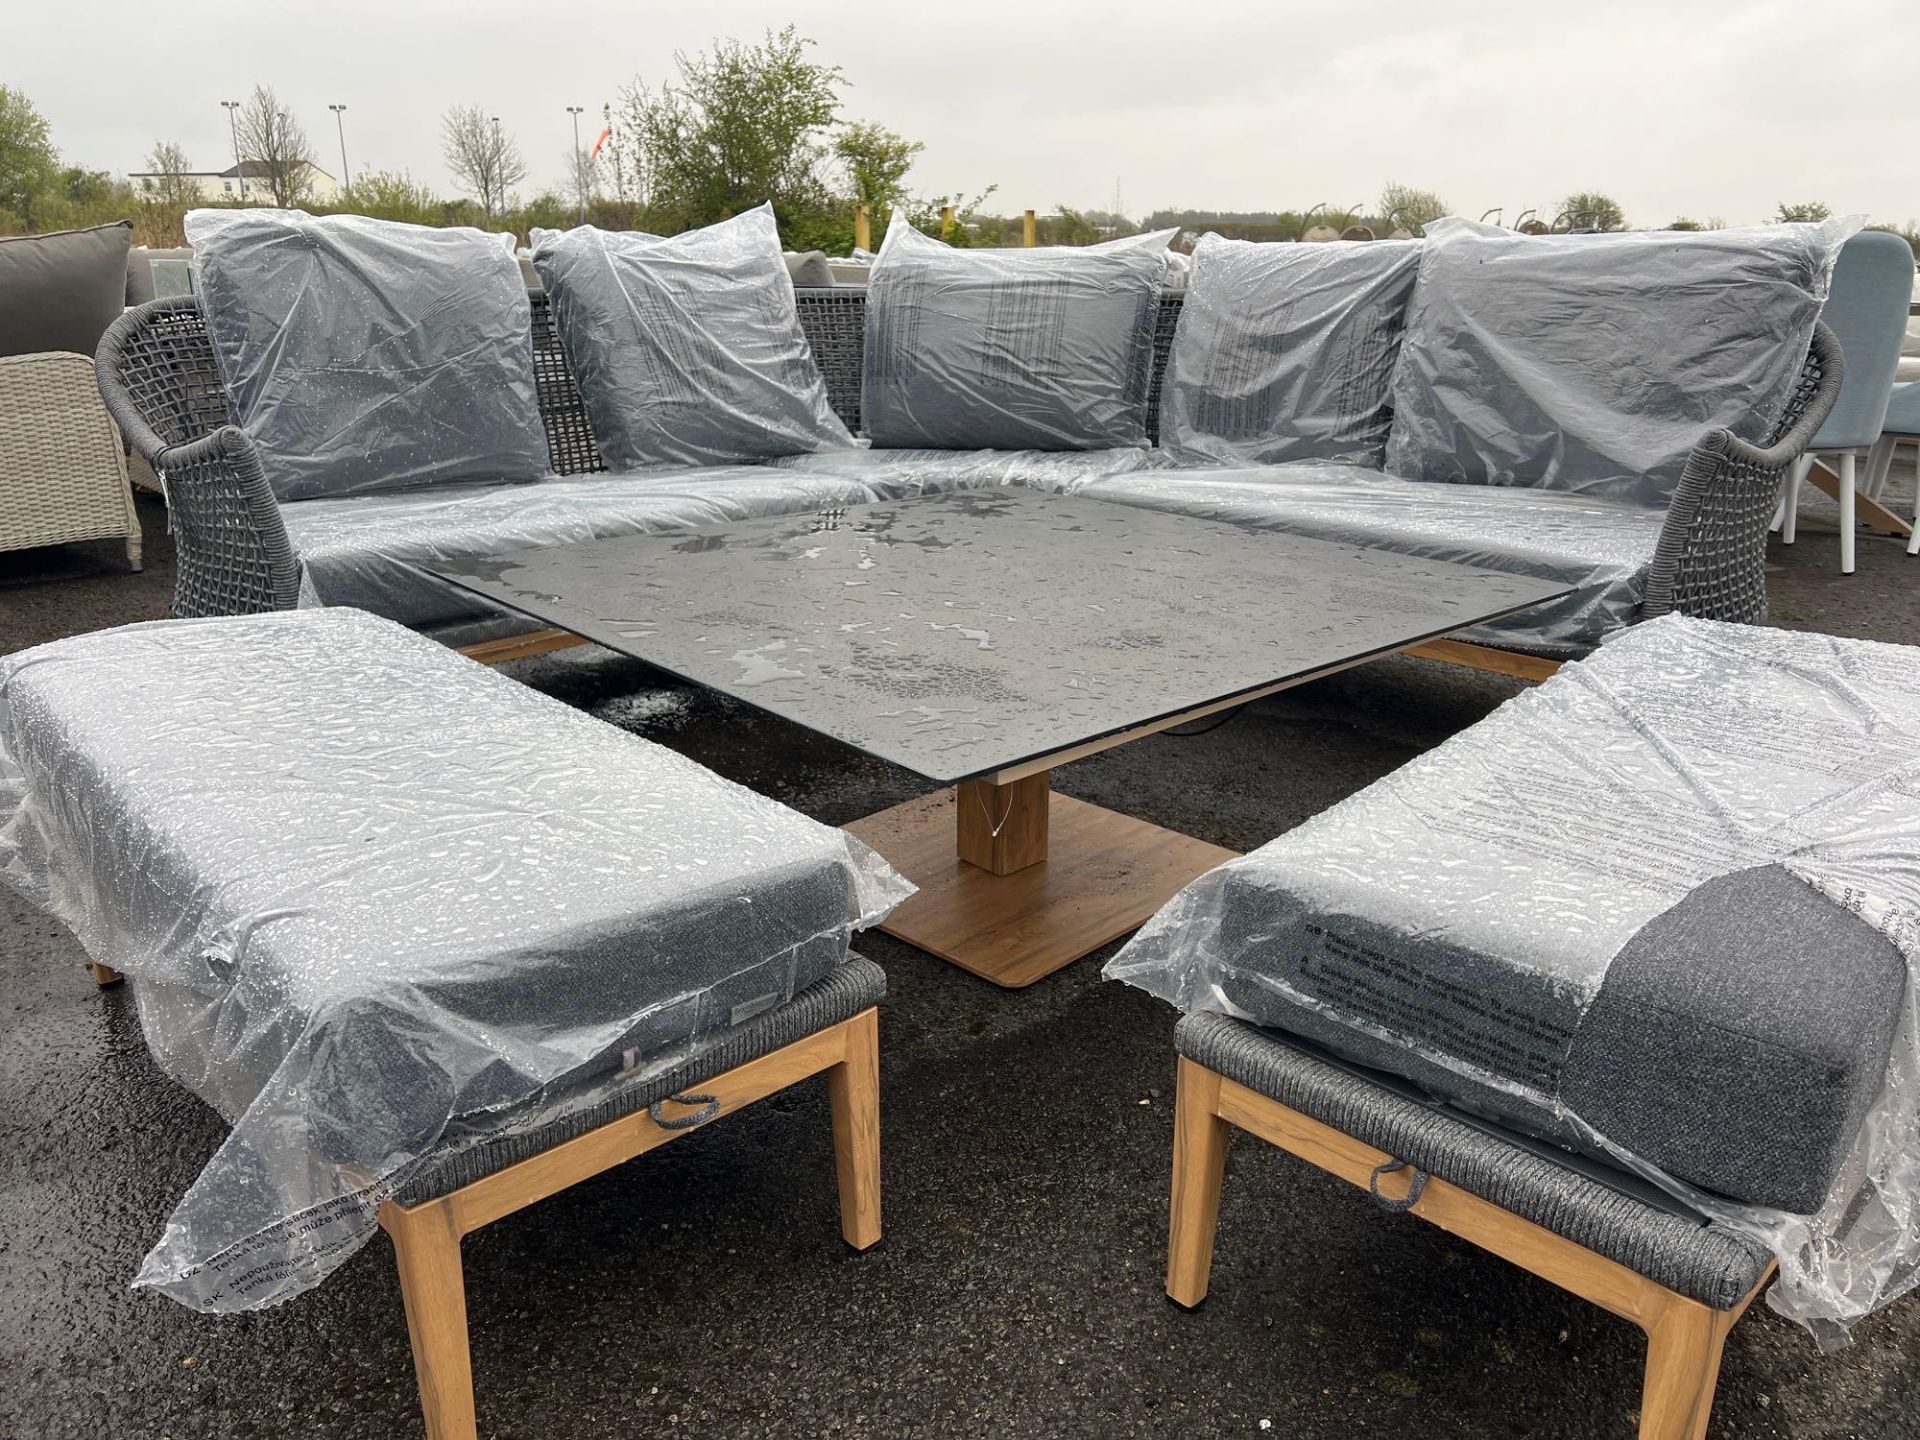 A45 Vogue Rope Modular Sofa with Square Piston Table and 2 x Benches Slate - Image 2 of 4